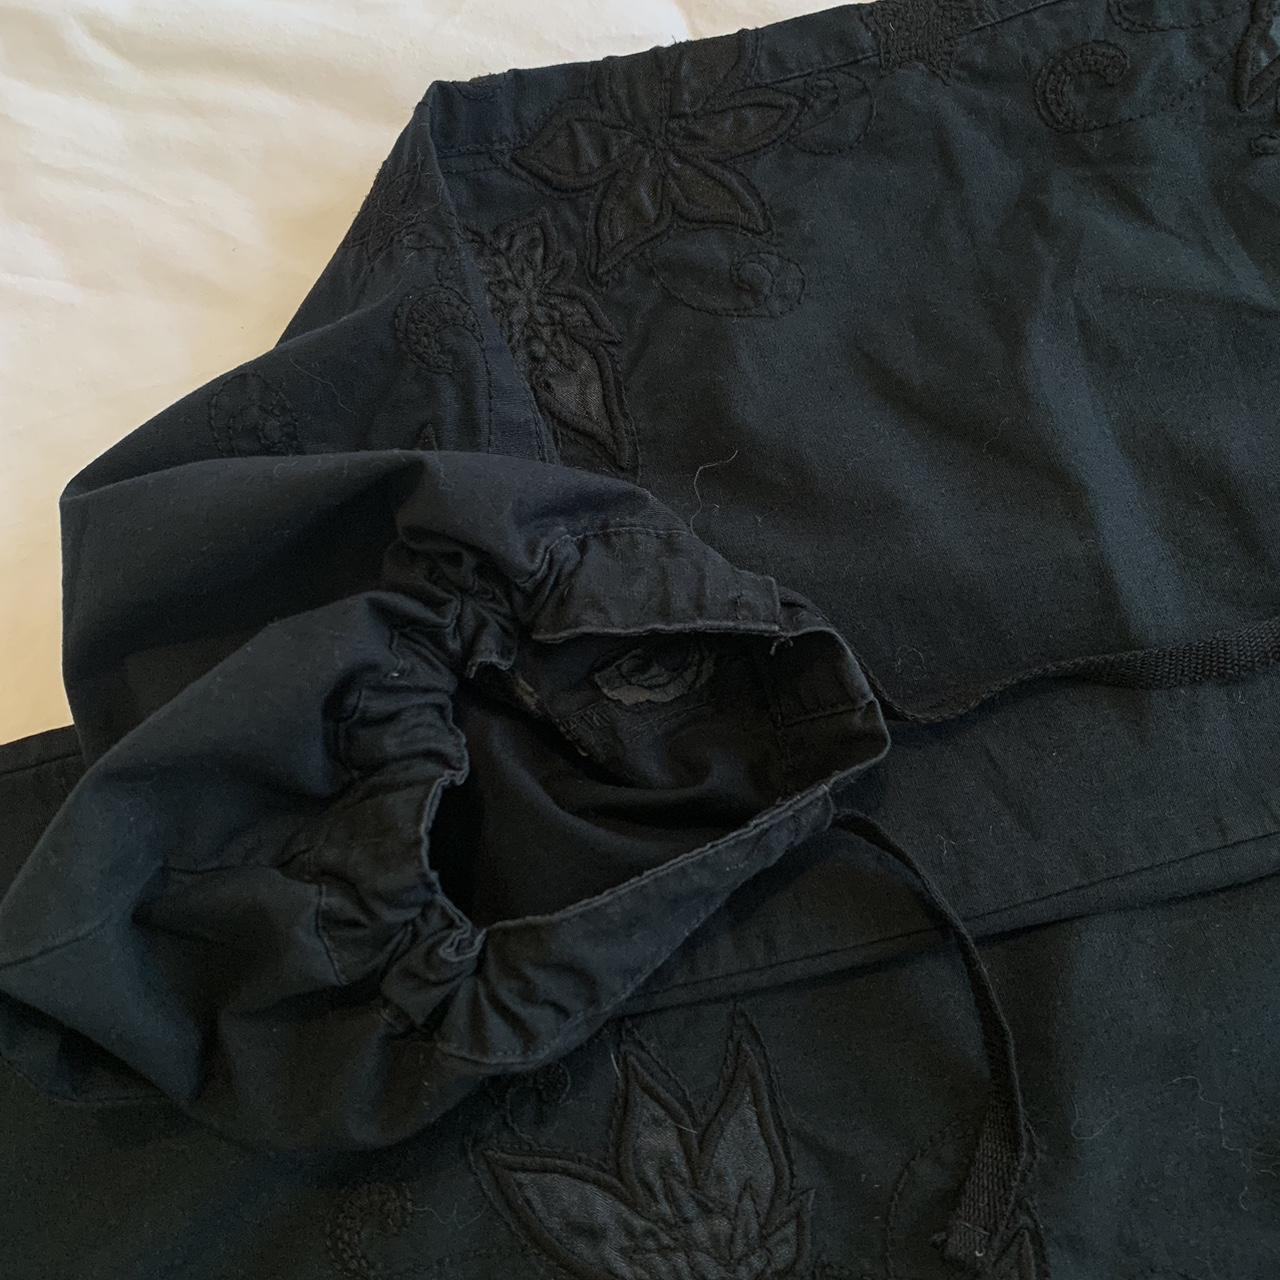 00s Next black embroidered cargos with adjustable... - Depop